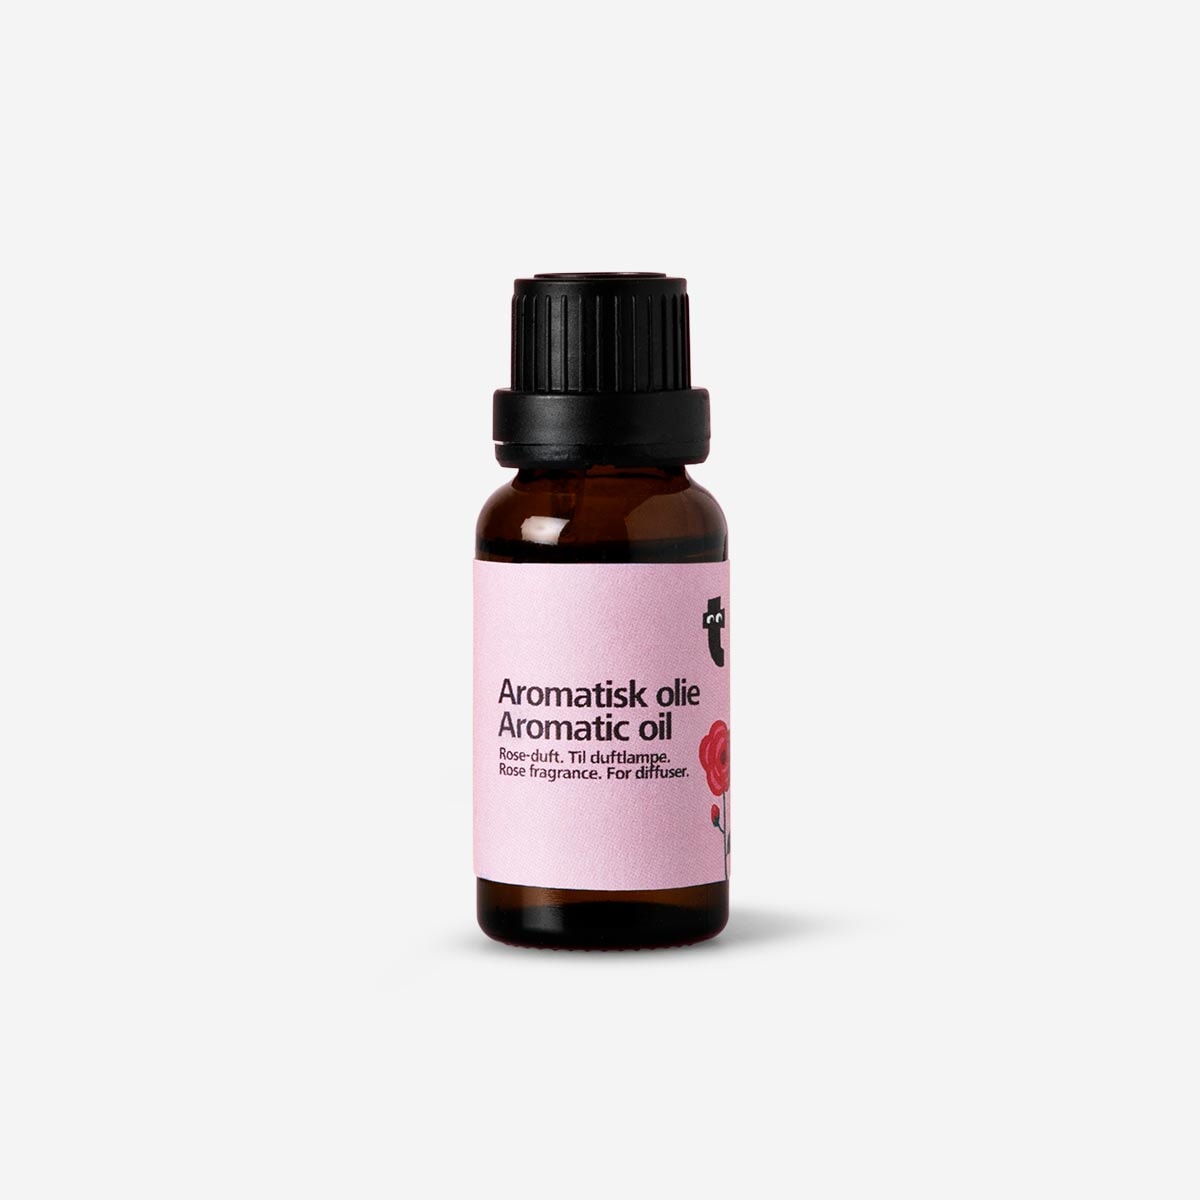 Aromatic oil for diffuser. Rose fragrance Personal care Flying Tiger Copenhagen 